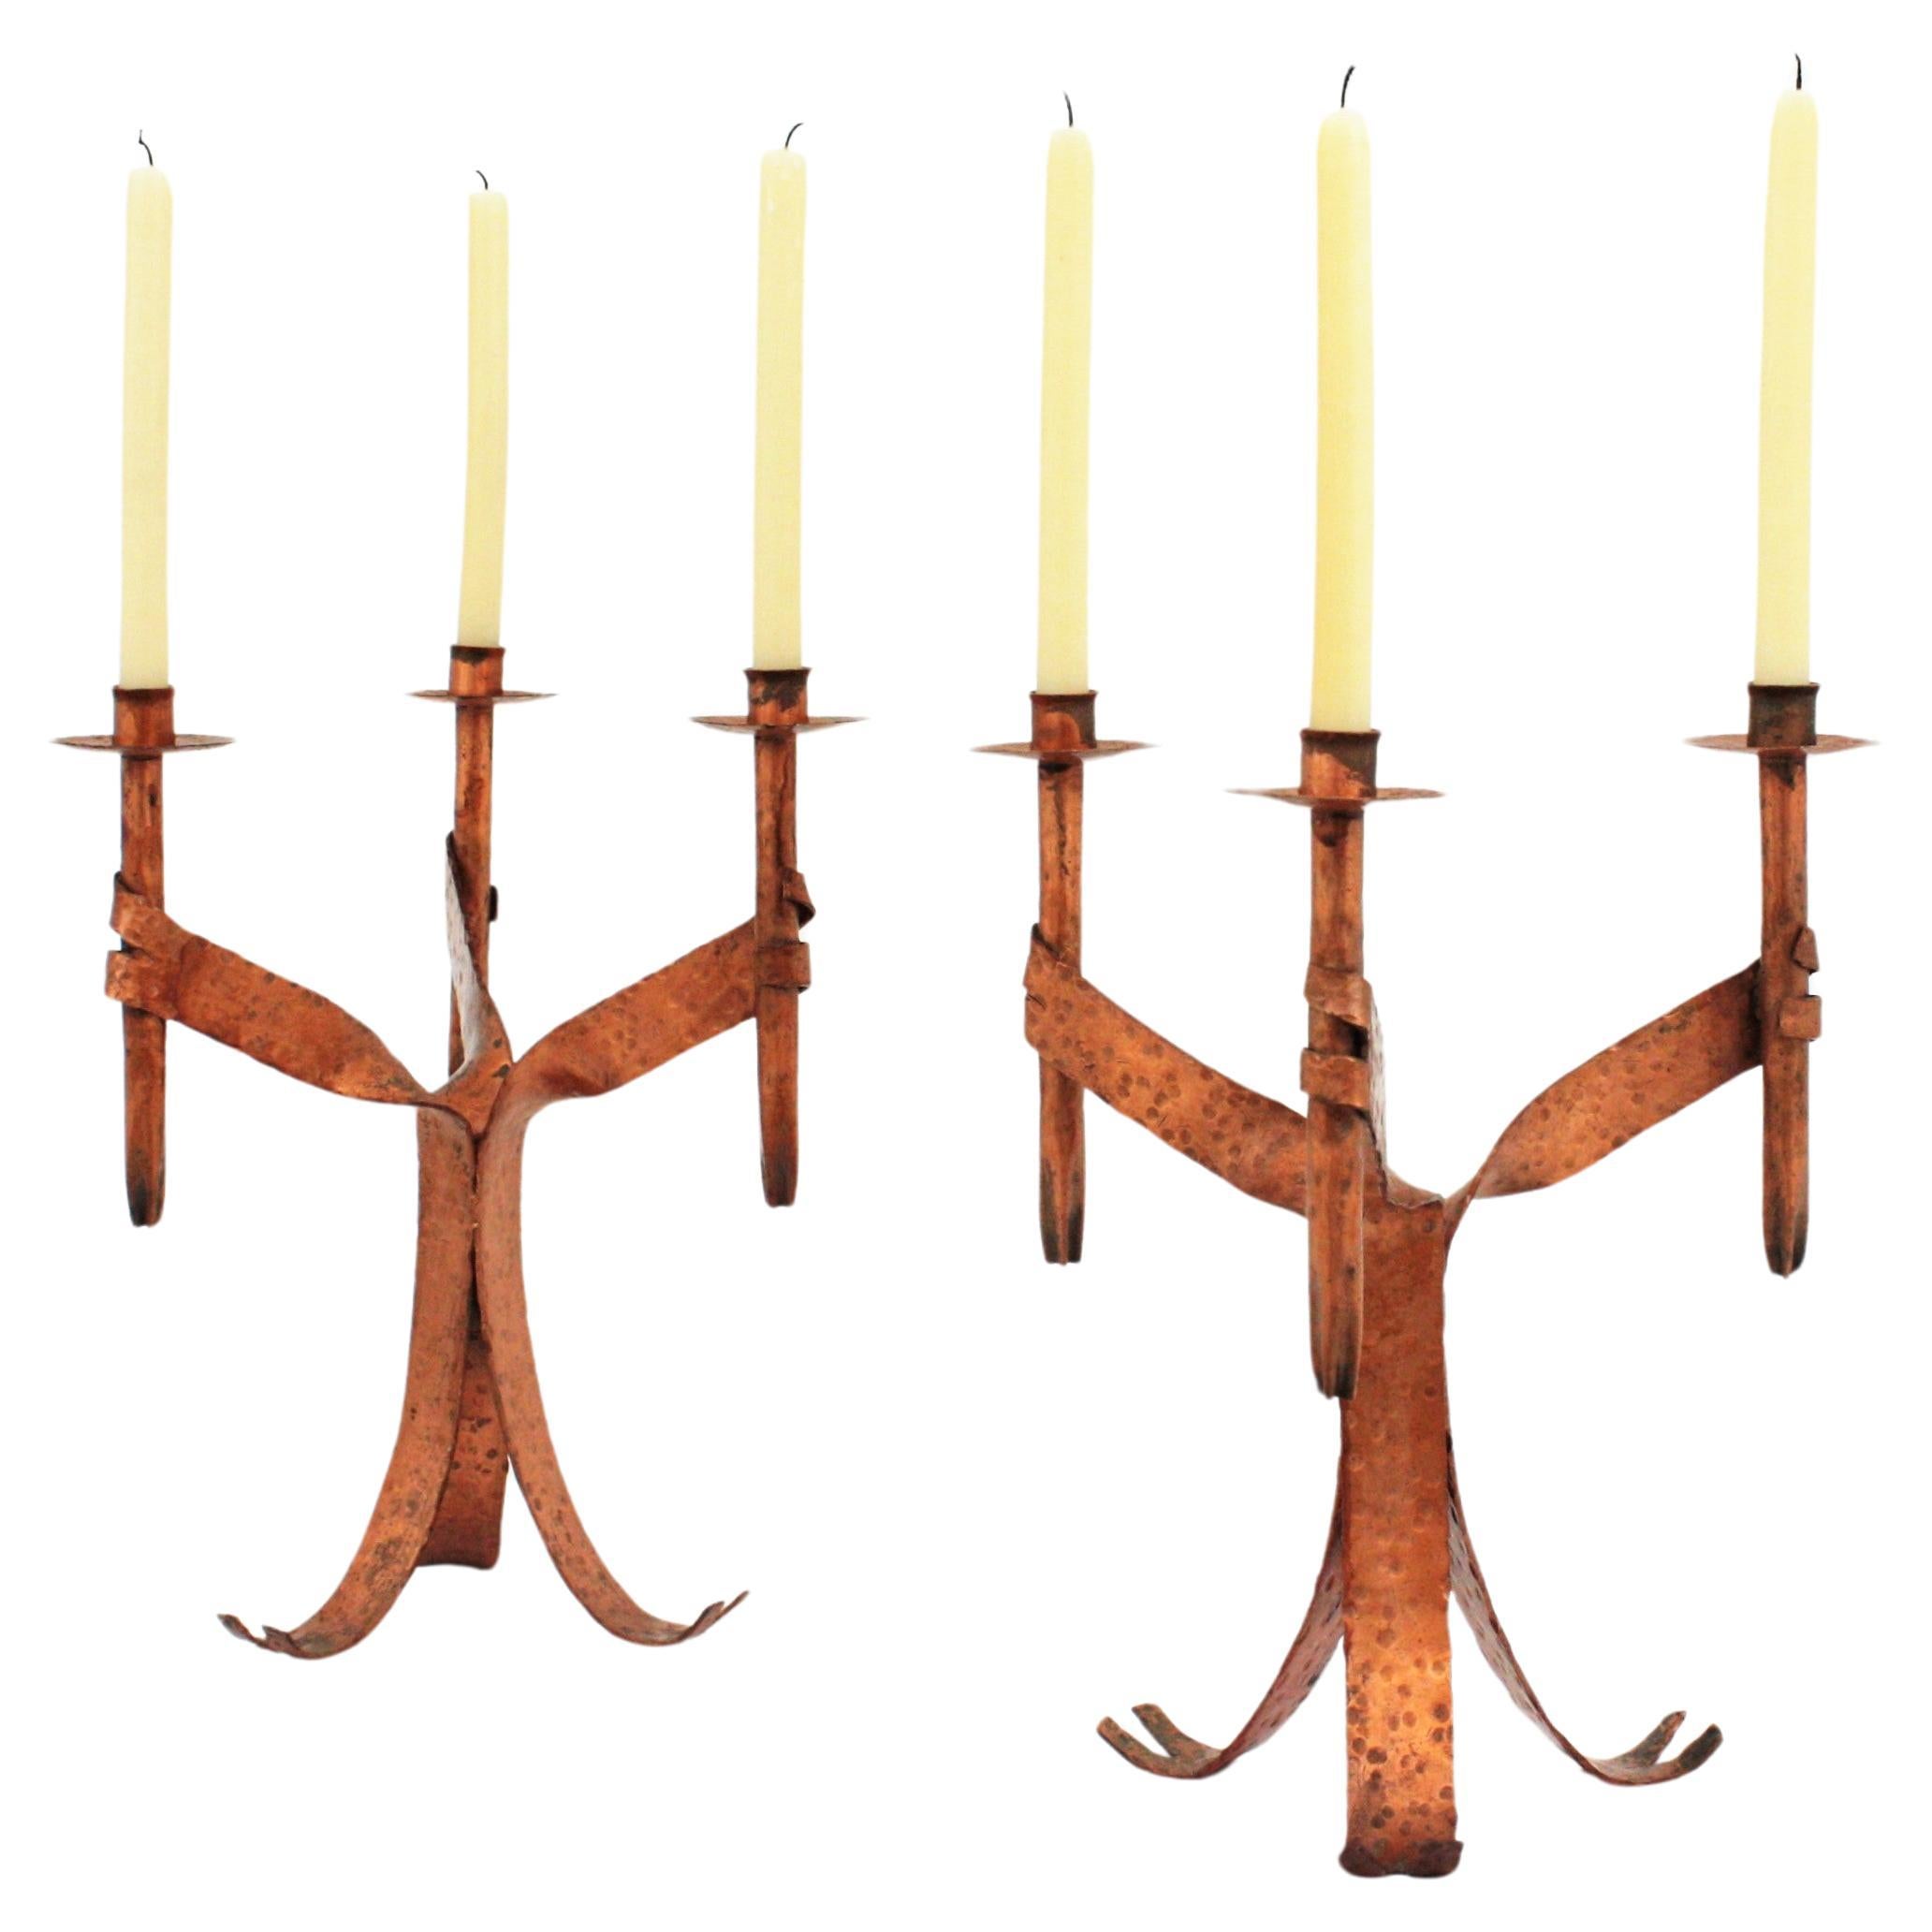 Pair of Candleholders in Coppered Wrought Iron, Gothic Revival